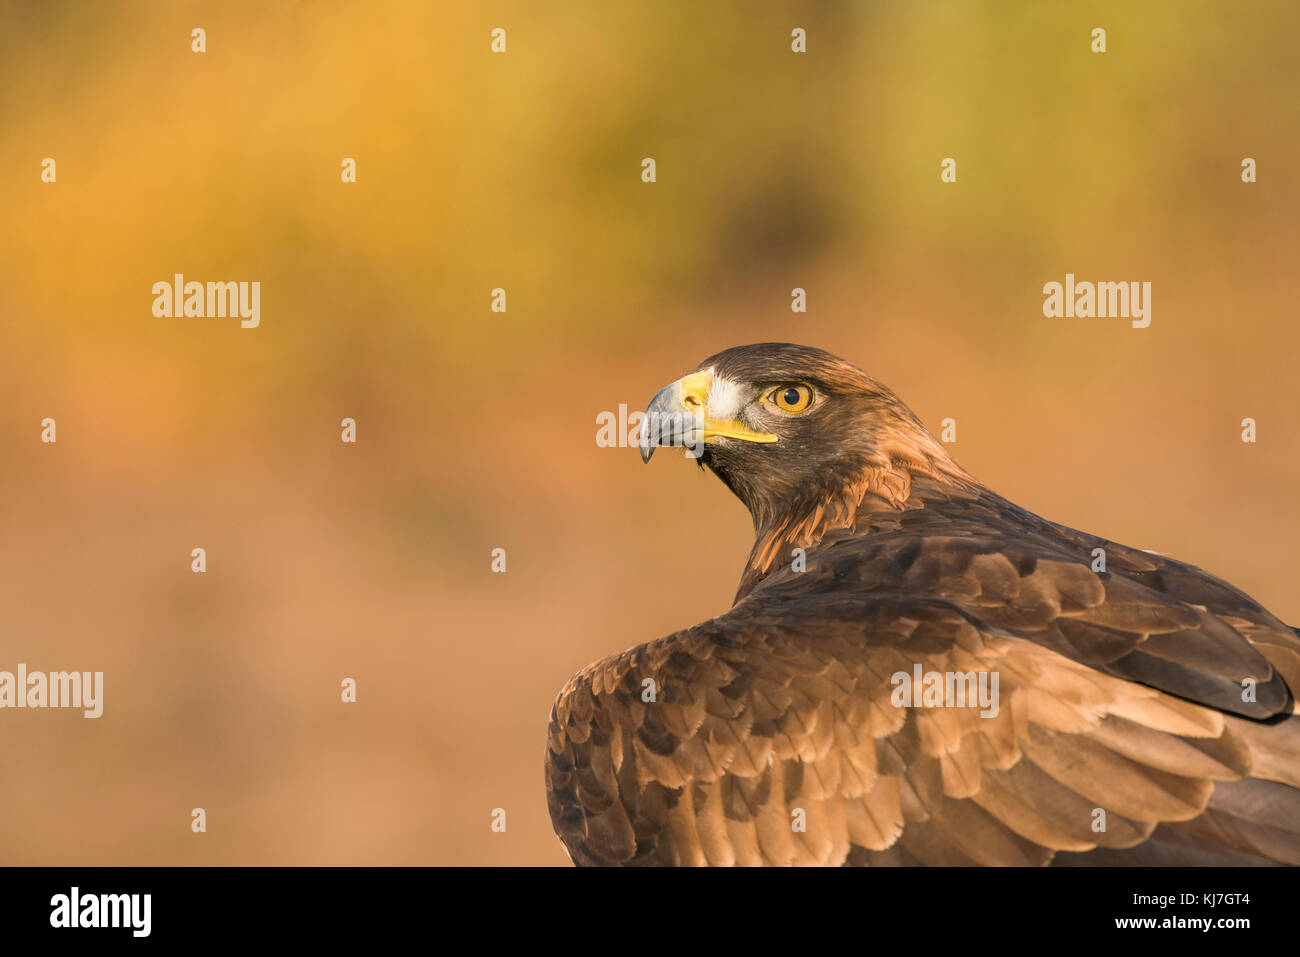 Golden Eagle,Aquila chrysaetos,with the colors of late Autumn in the background,close up detail of head and upper body Stock Photo